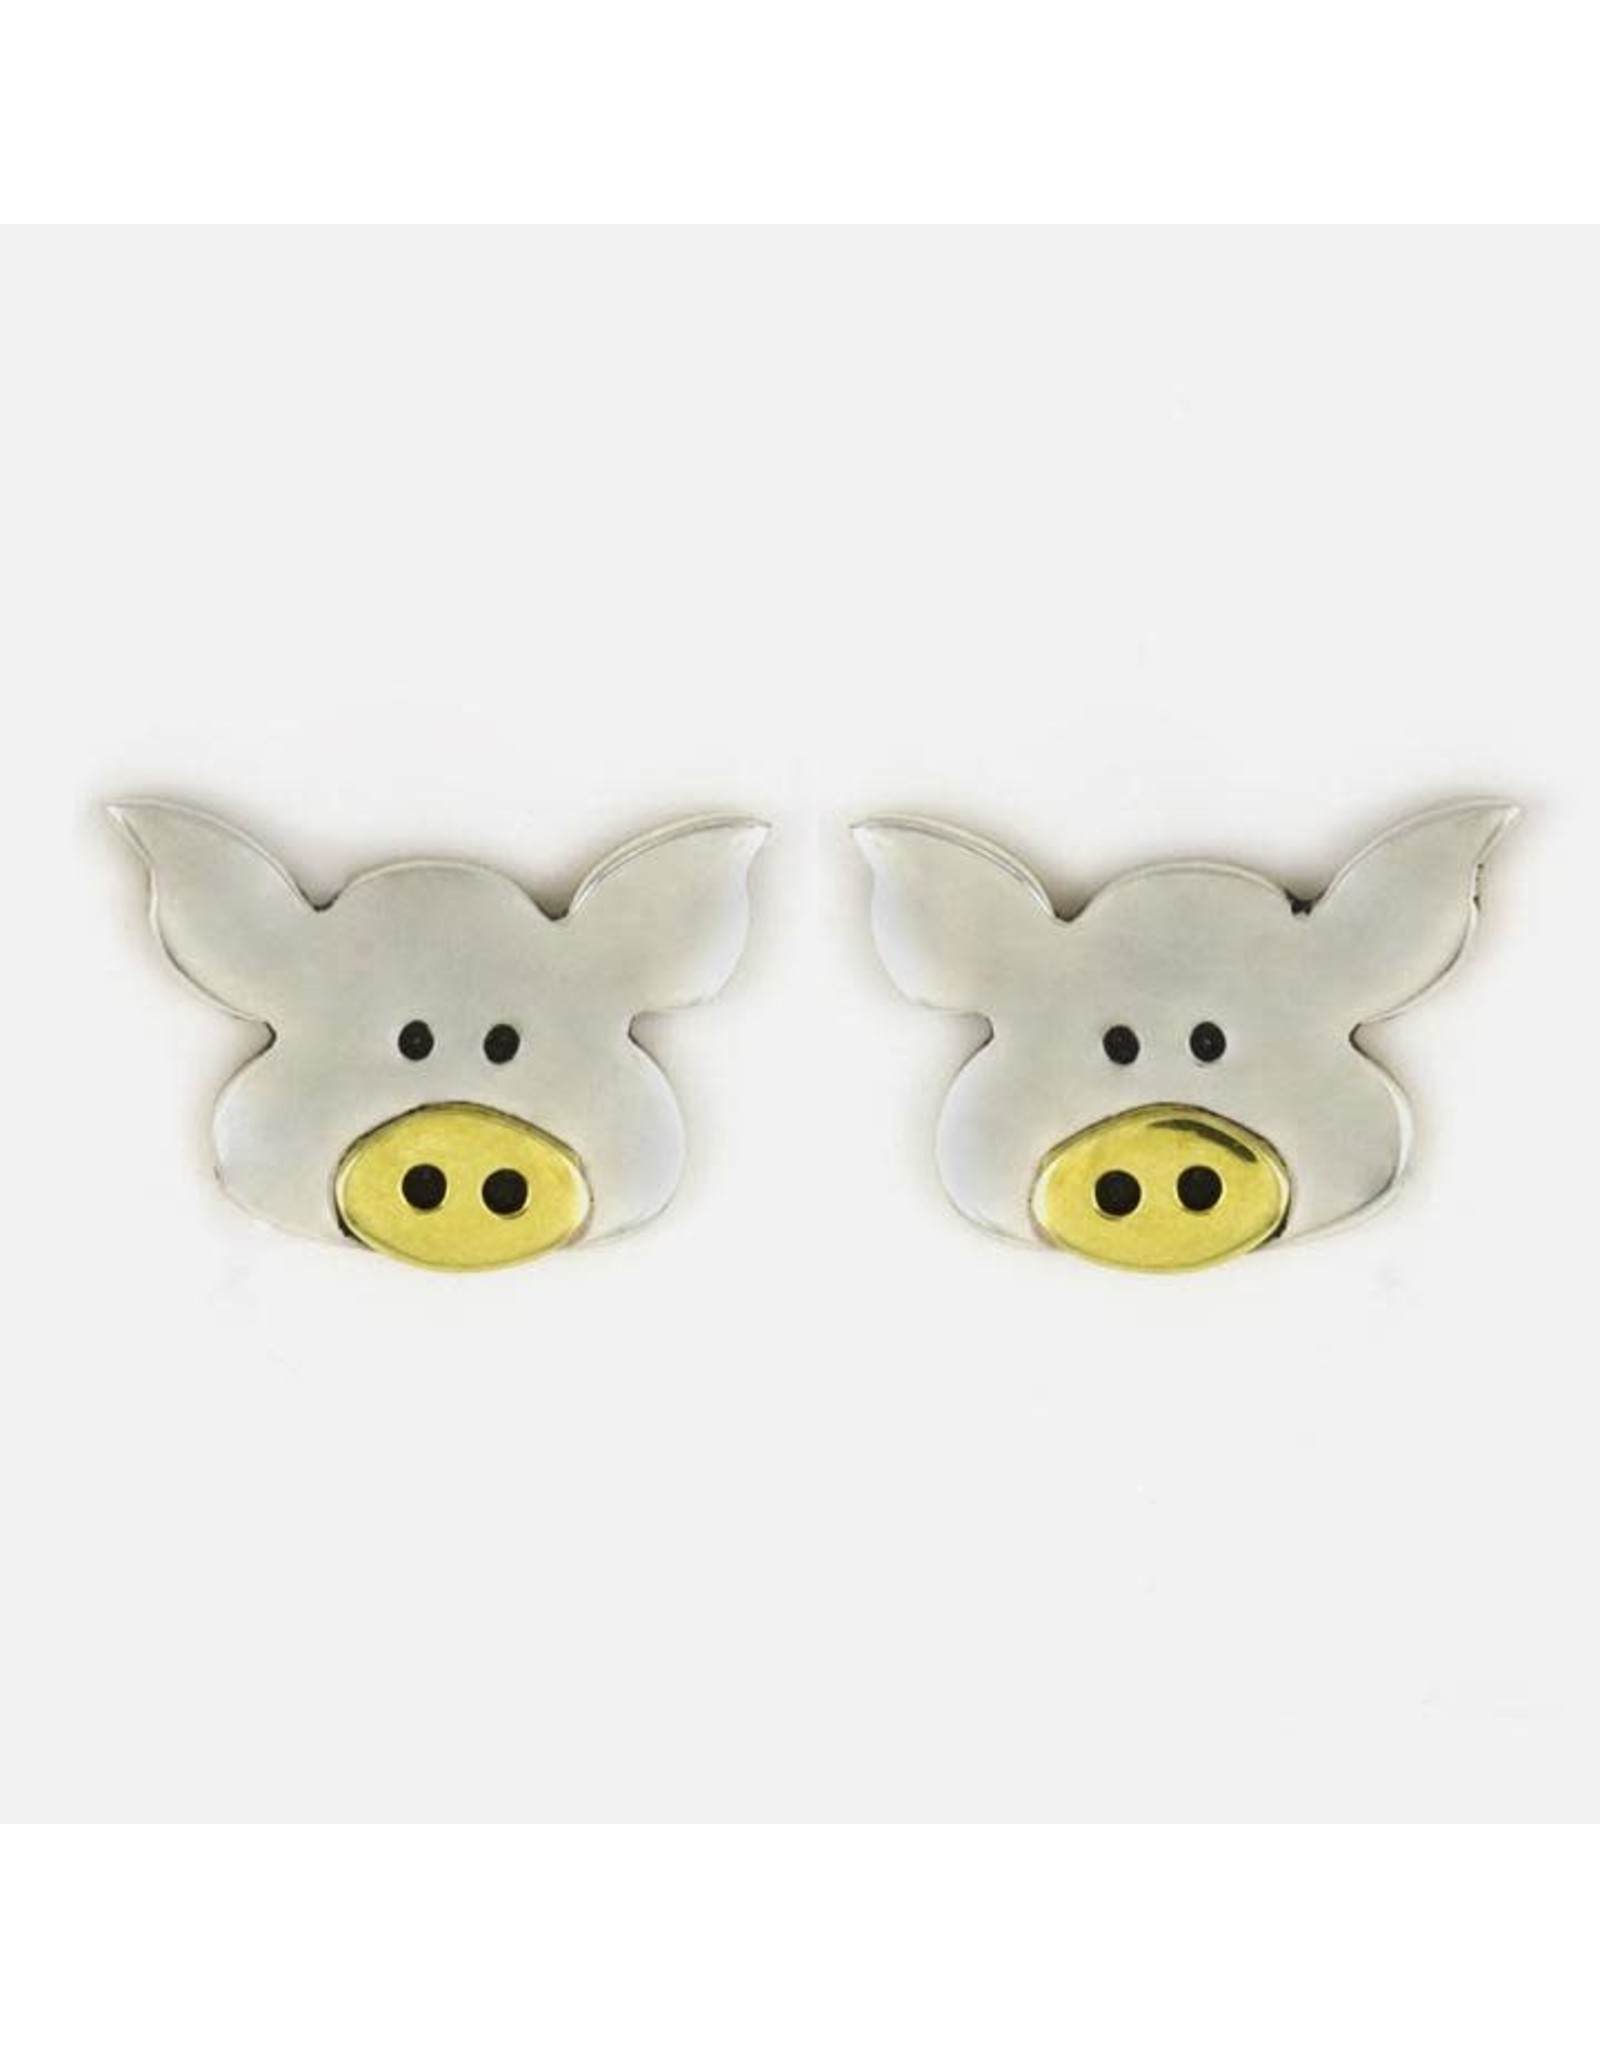 Sterling Silver Pig Post Earrings, Mexico